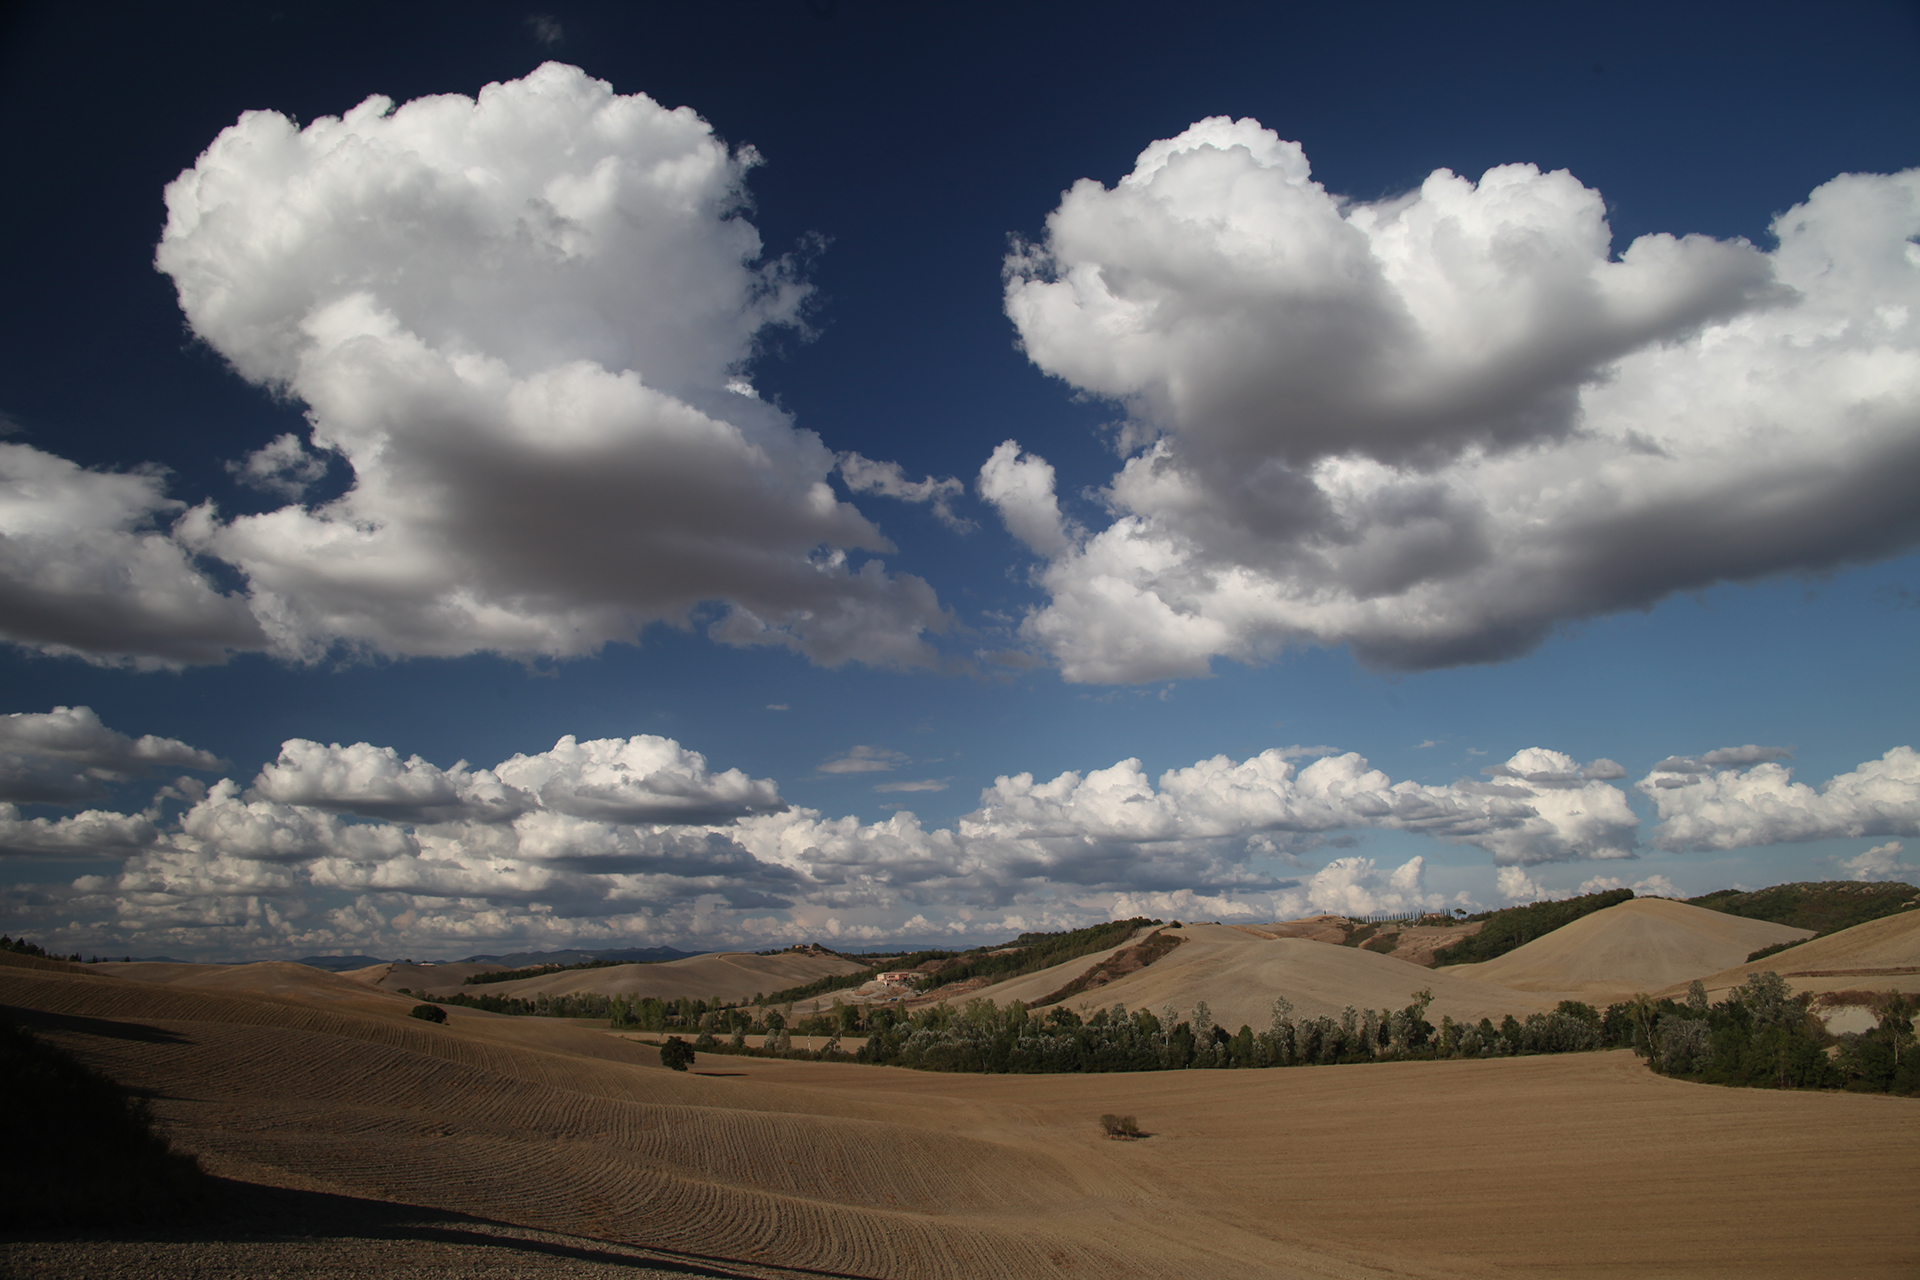 Landscape of Tuscan hills and cloudy sky, Siena